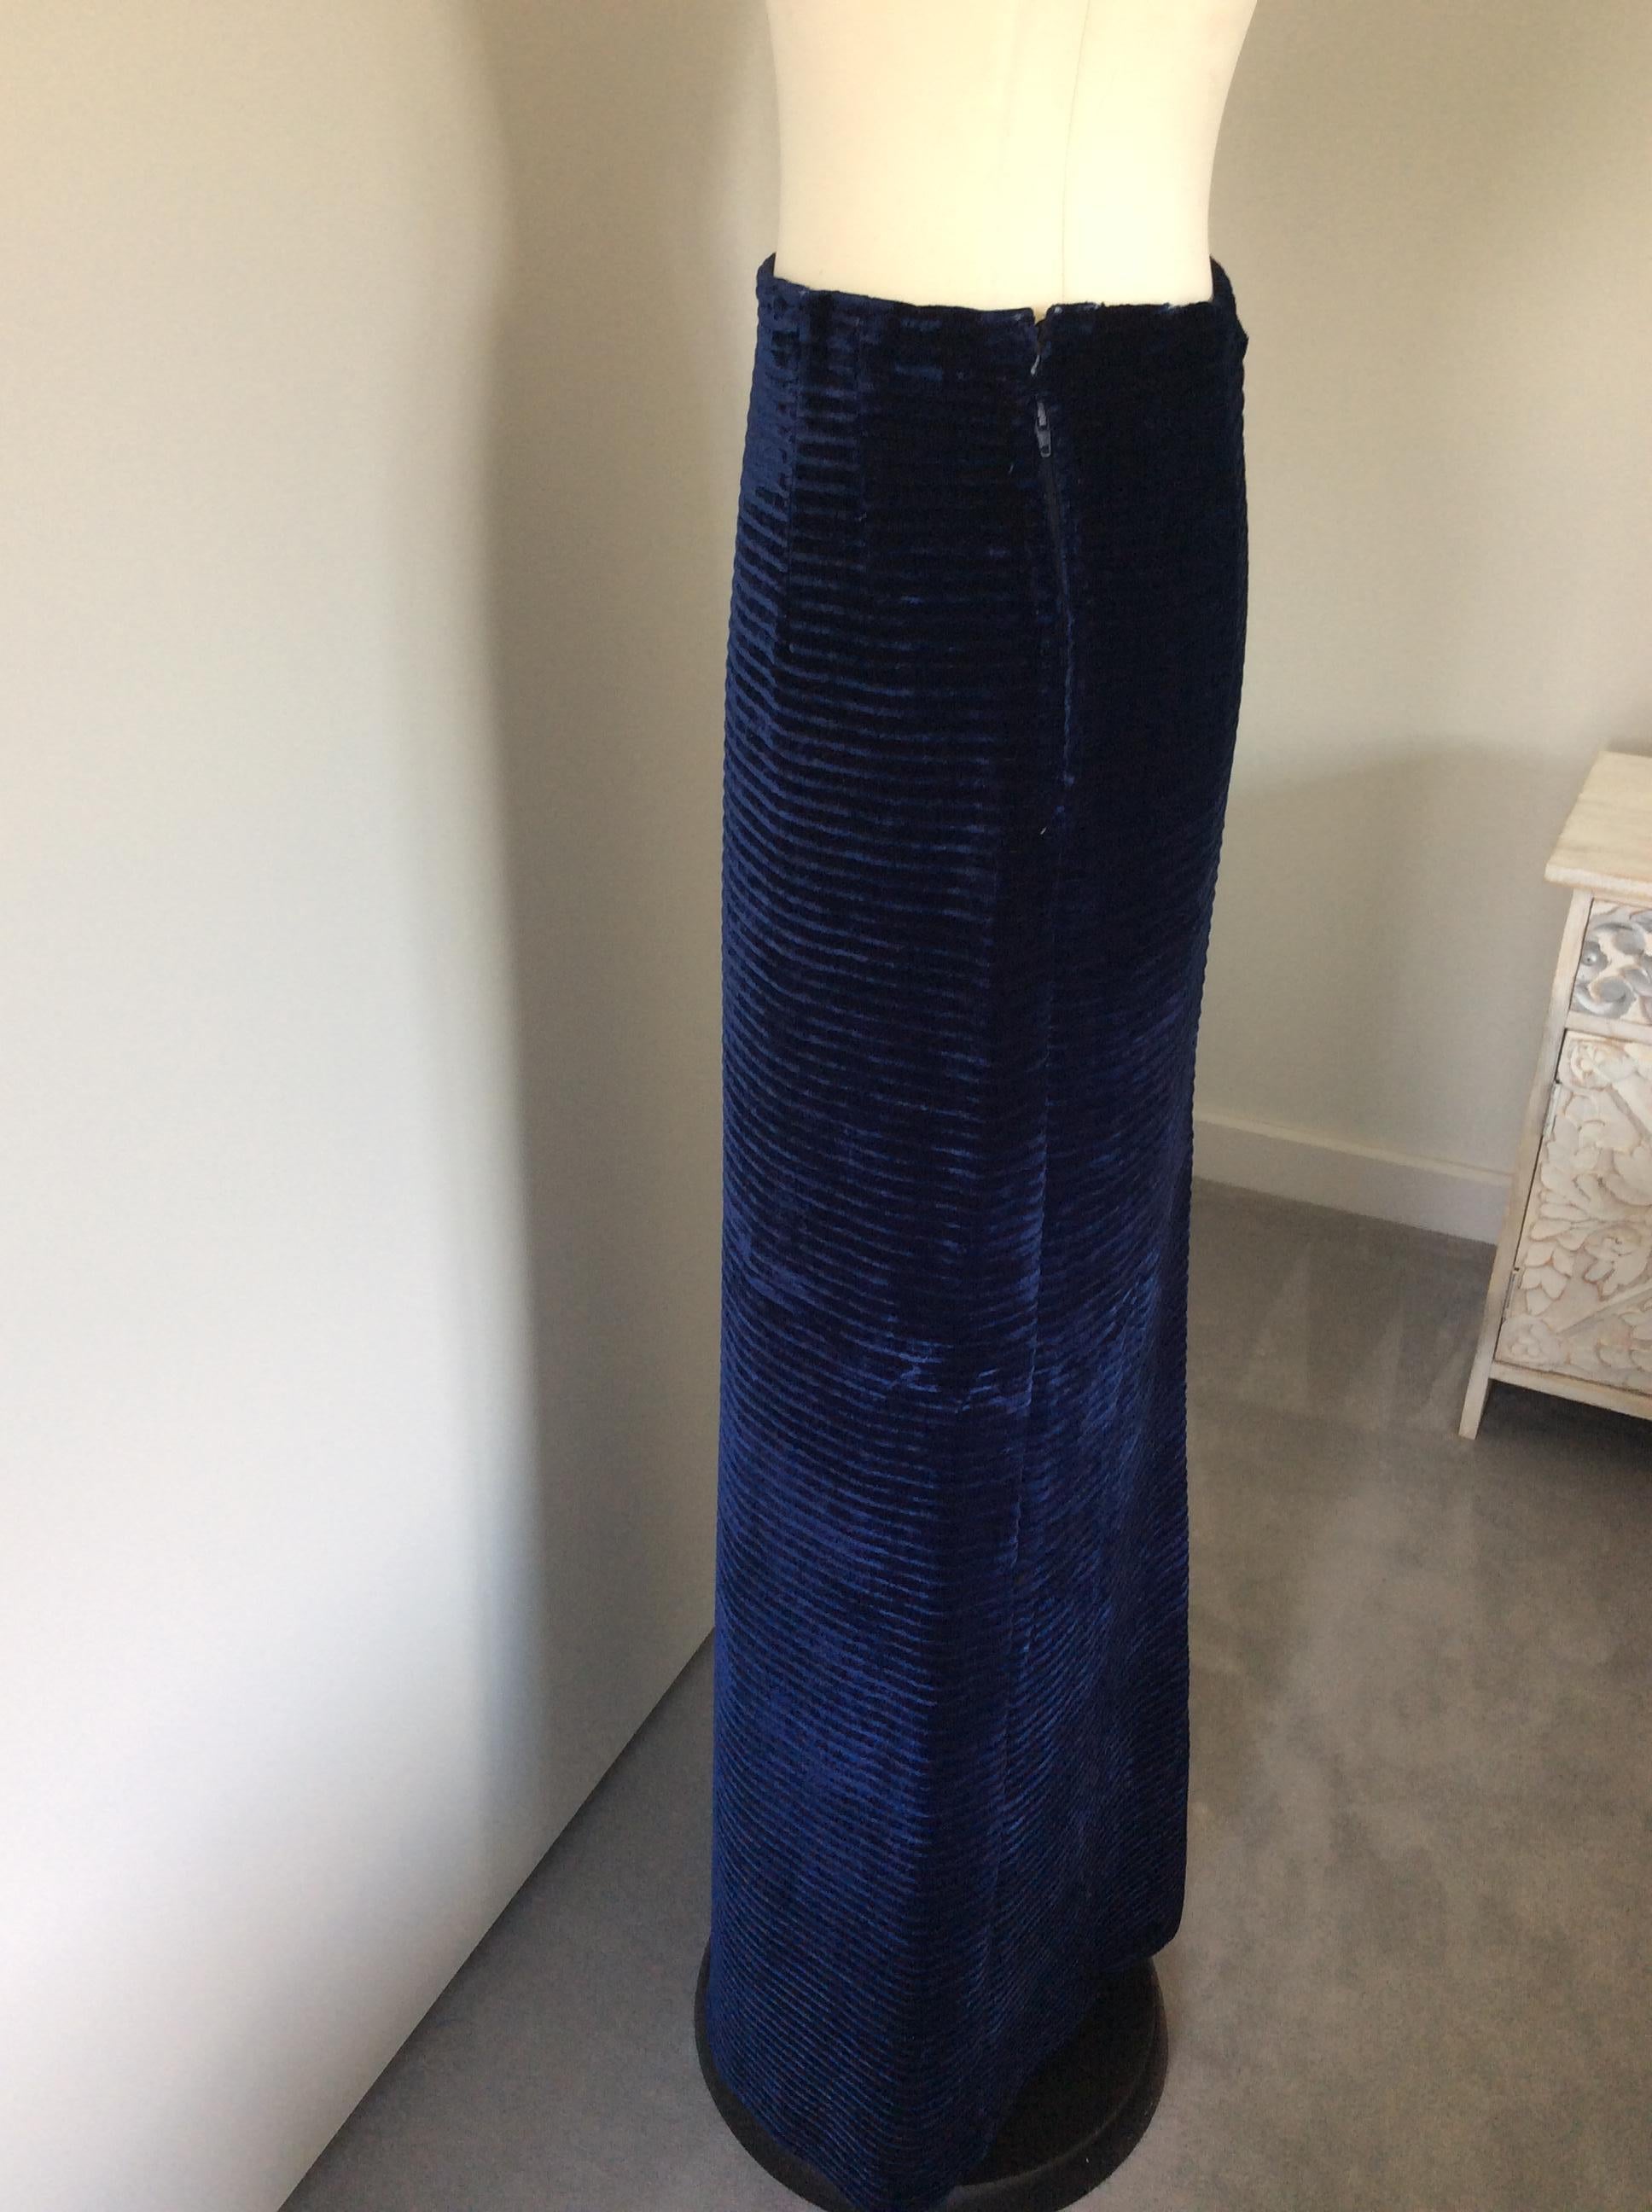 Vintage 1980s Jean Muir London navy ‘velvet’ maxi skirt UK size 10-14 About - midnight blue fabric with the look and feel of velvet, with unusual horizontal banding.  Skirt has an elasticated waistband, side zip and hook&eye closure and is